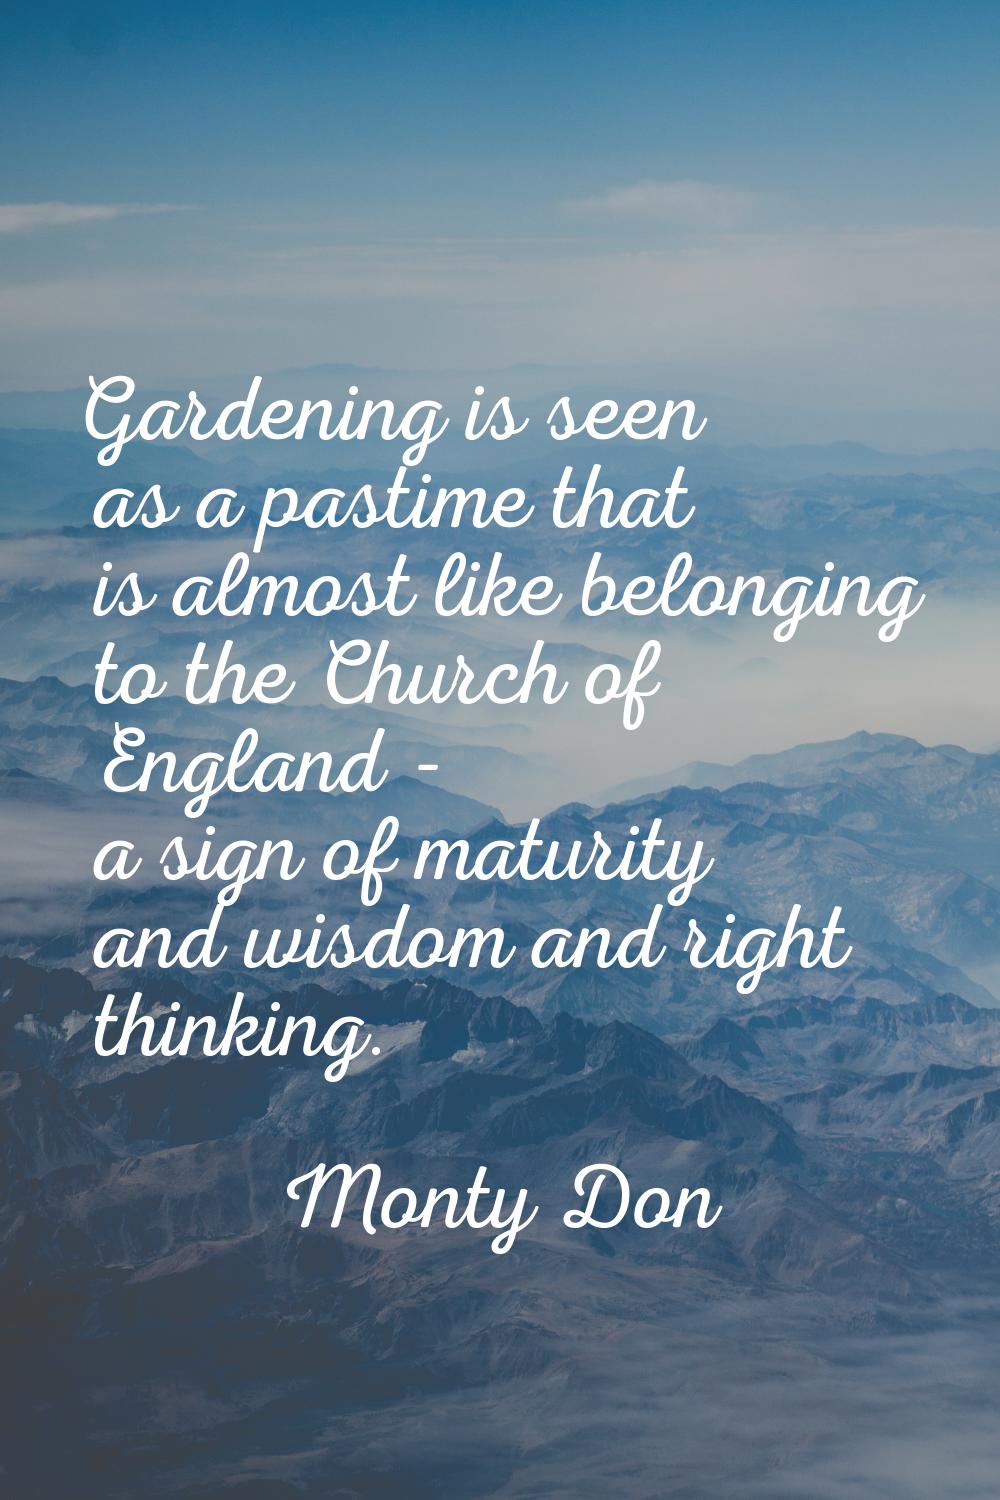 Gardening is seen as a pastime that is almost like belonging to the Church of England - a sign of m